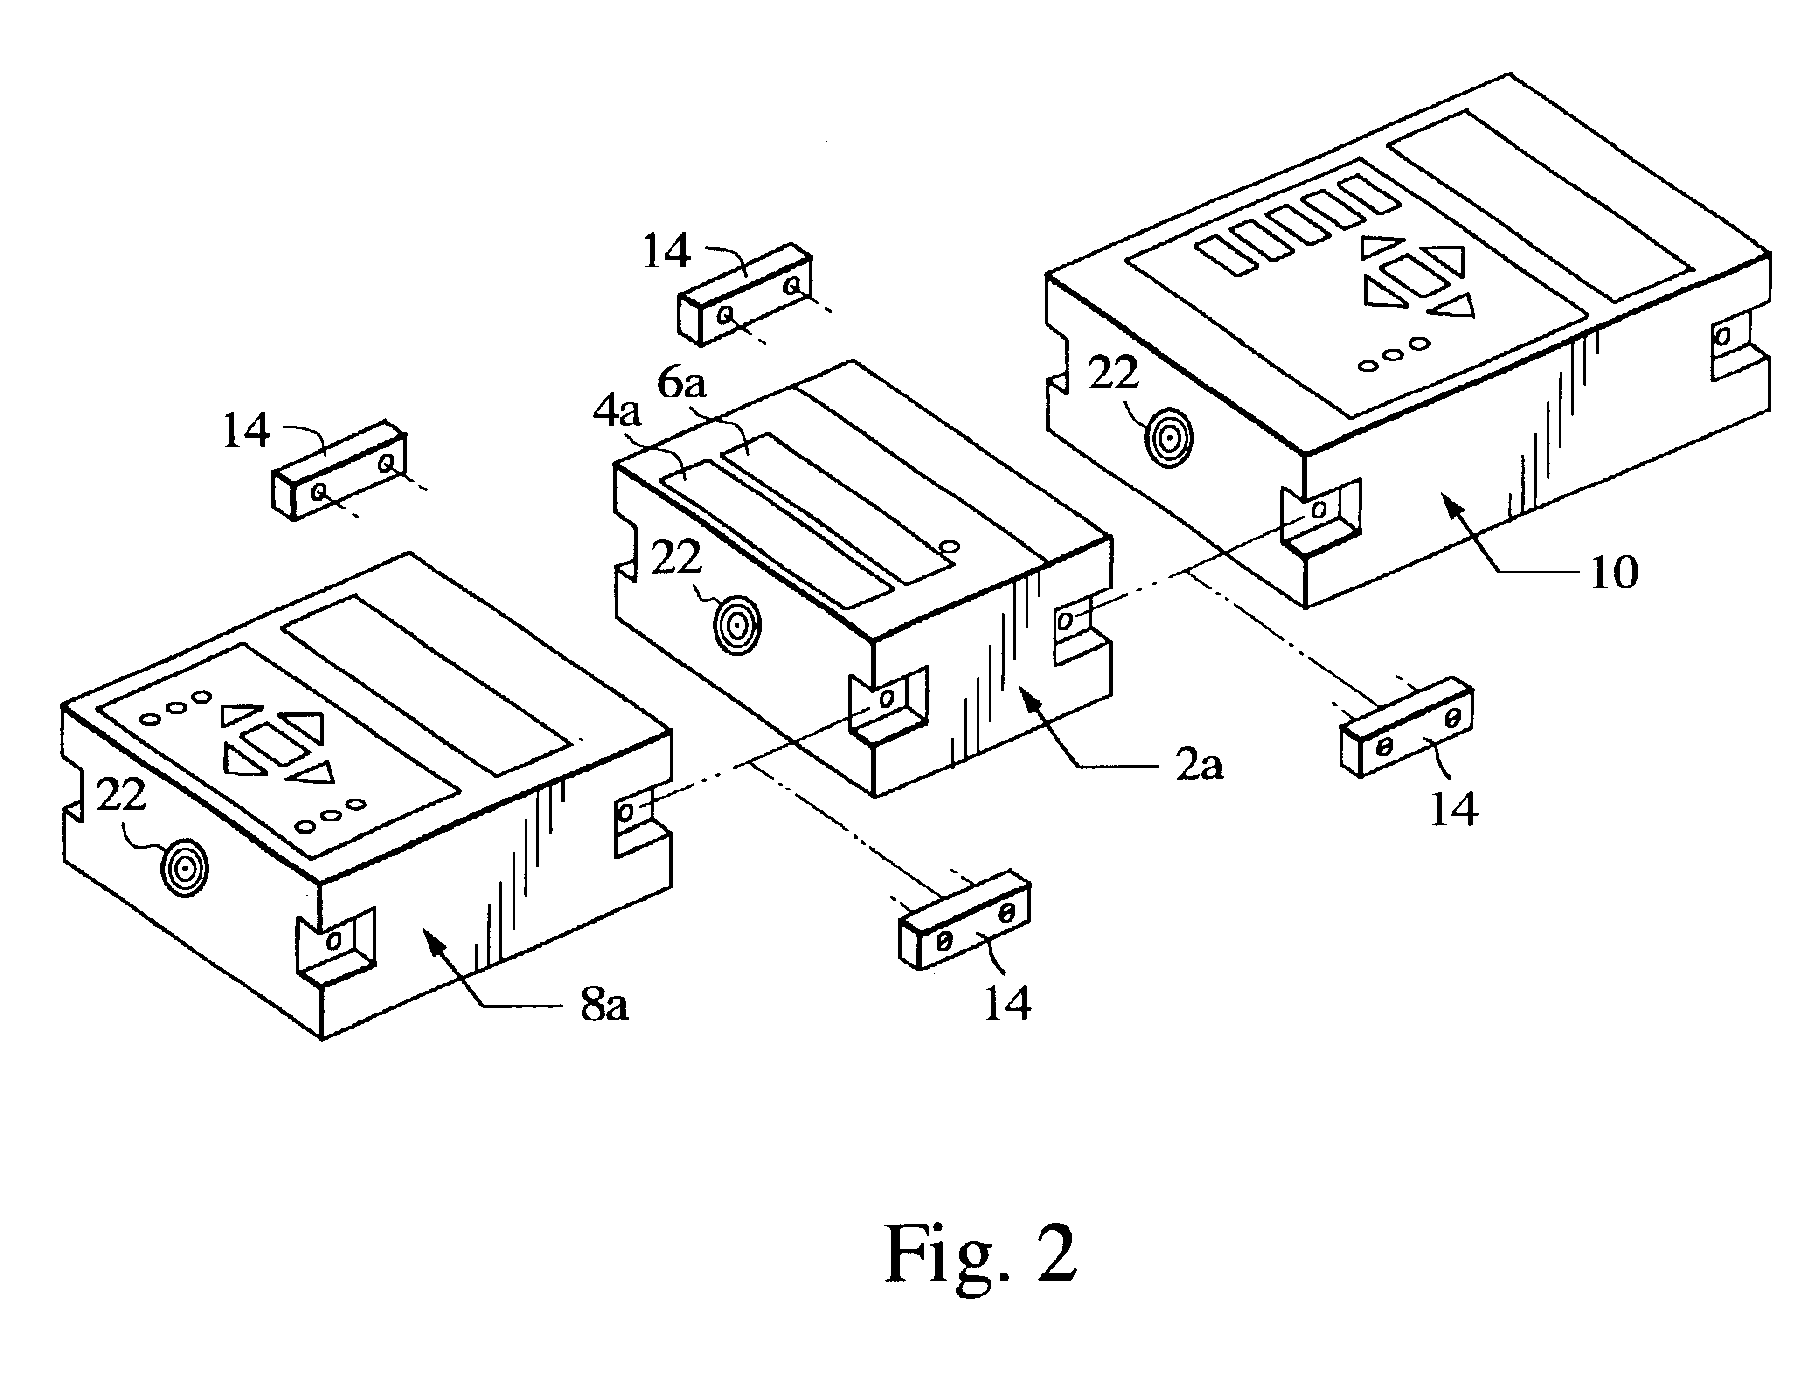 Portable modular electronic system with symmetrical connections